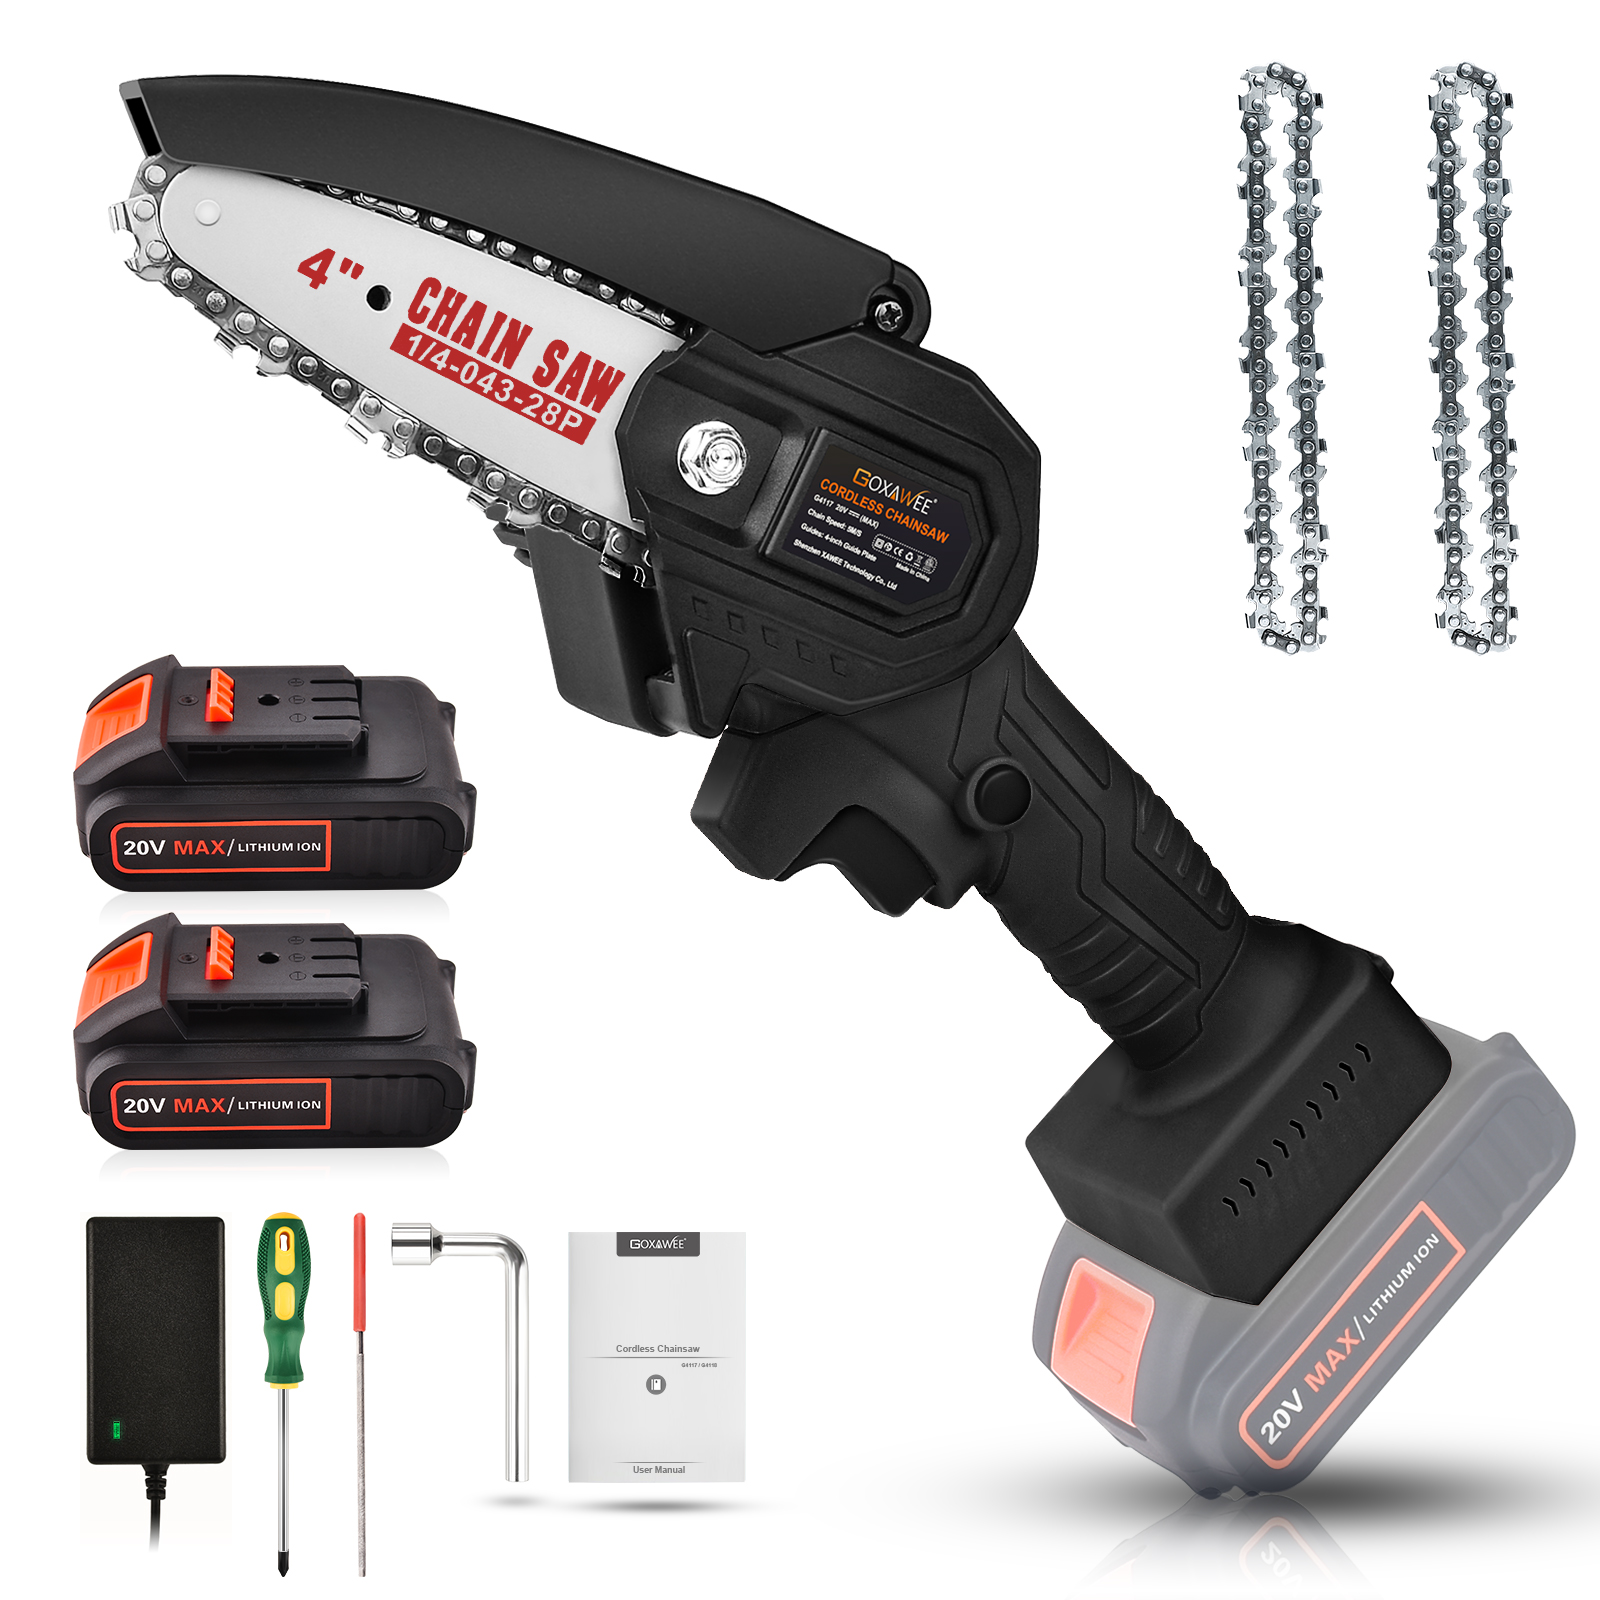 Mini Chainsaw Cordless 20V 4 Inch, GOXAWEE Electric Power Chain Saw with 2pcs Batteries, One-Hand Operated Portable Wood Saw for Farming Tree Limbs, Garden Pruning, Bonsai Trunk, and Firewood